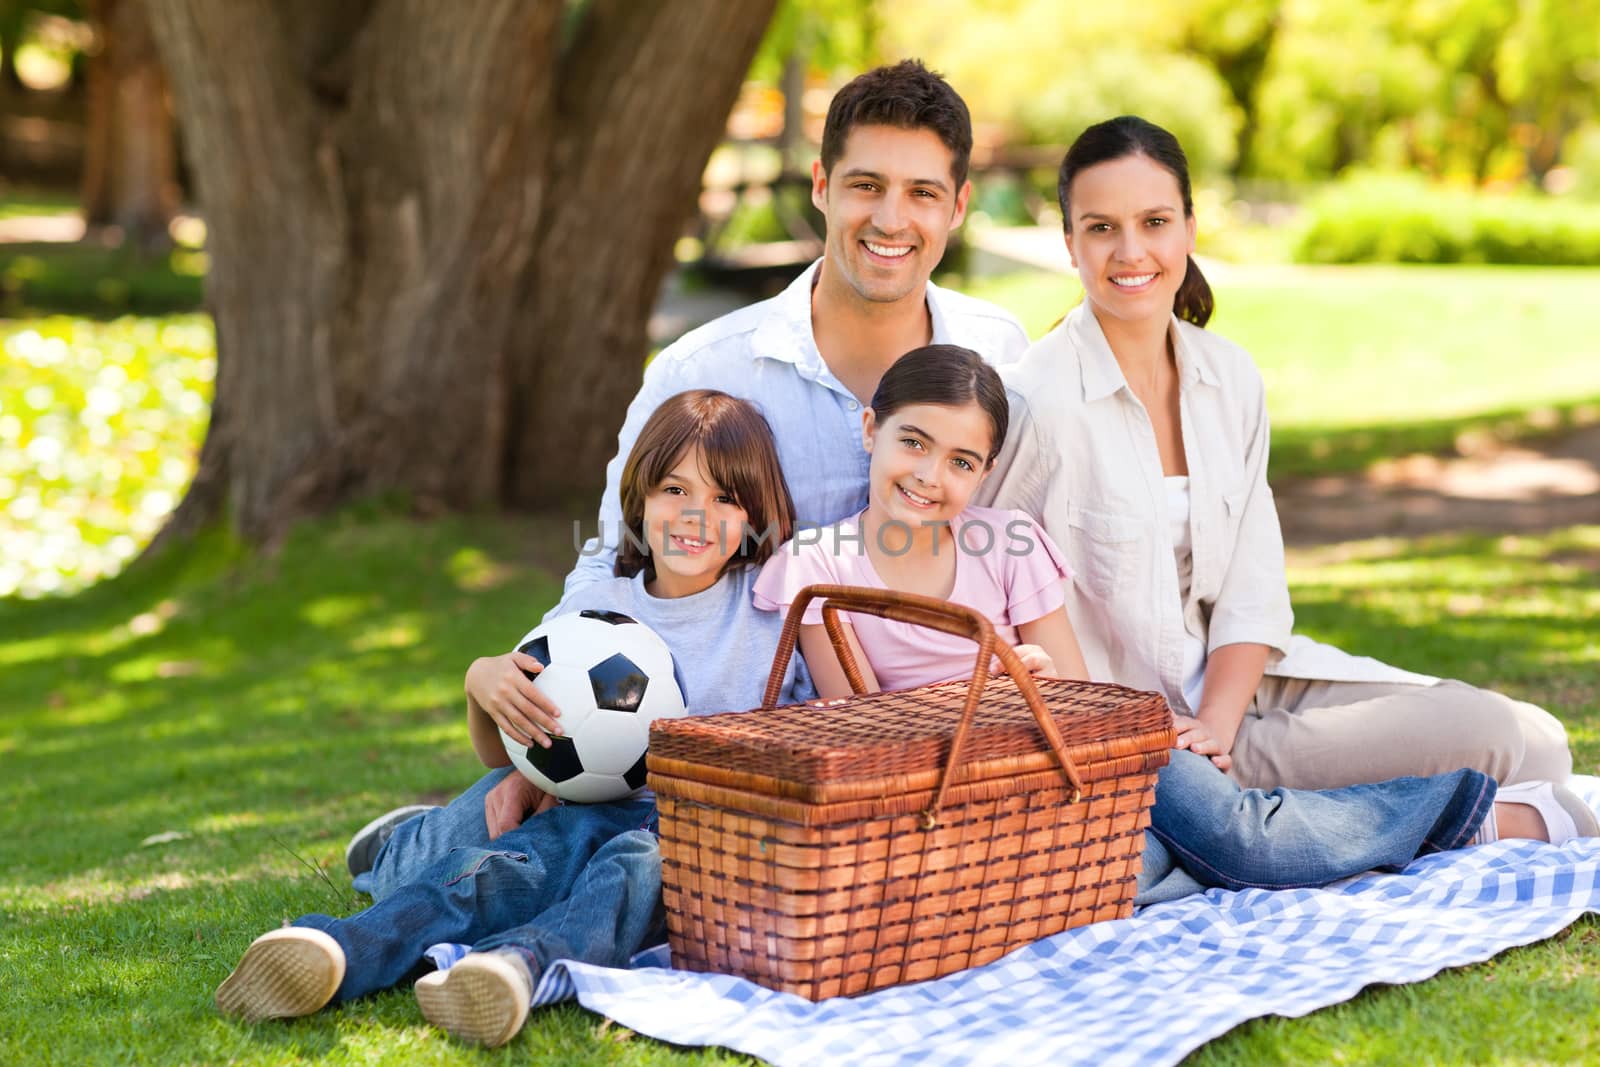 Happy family picnicking in the park during the summer